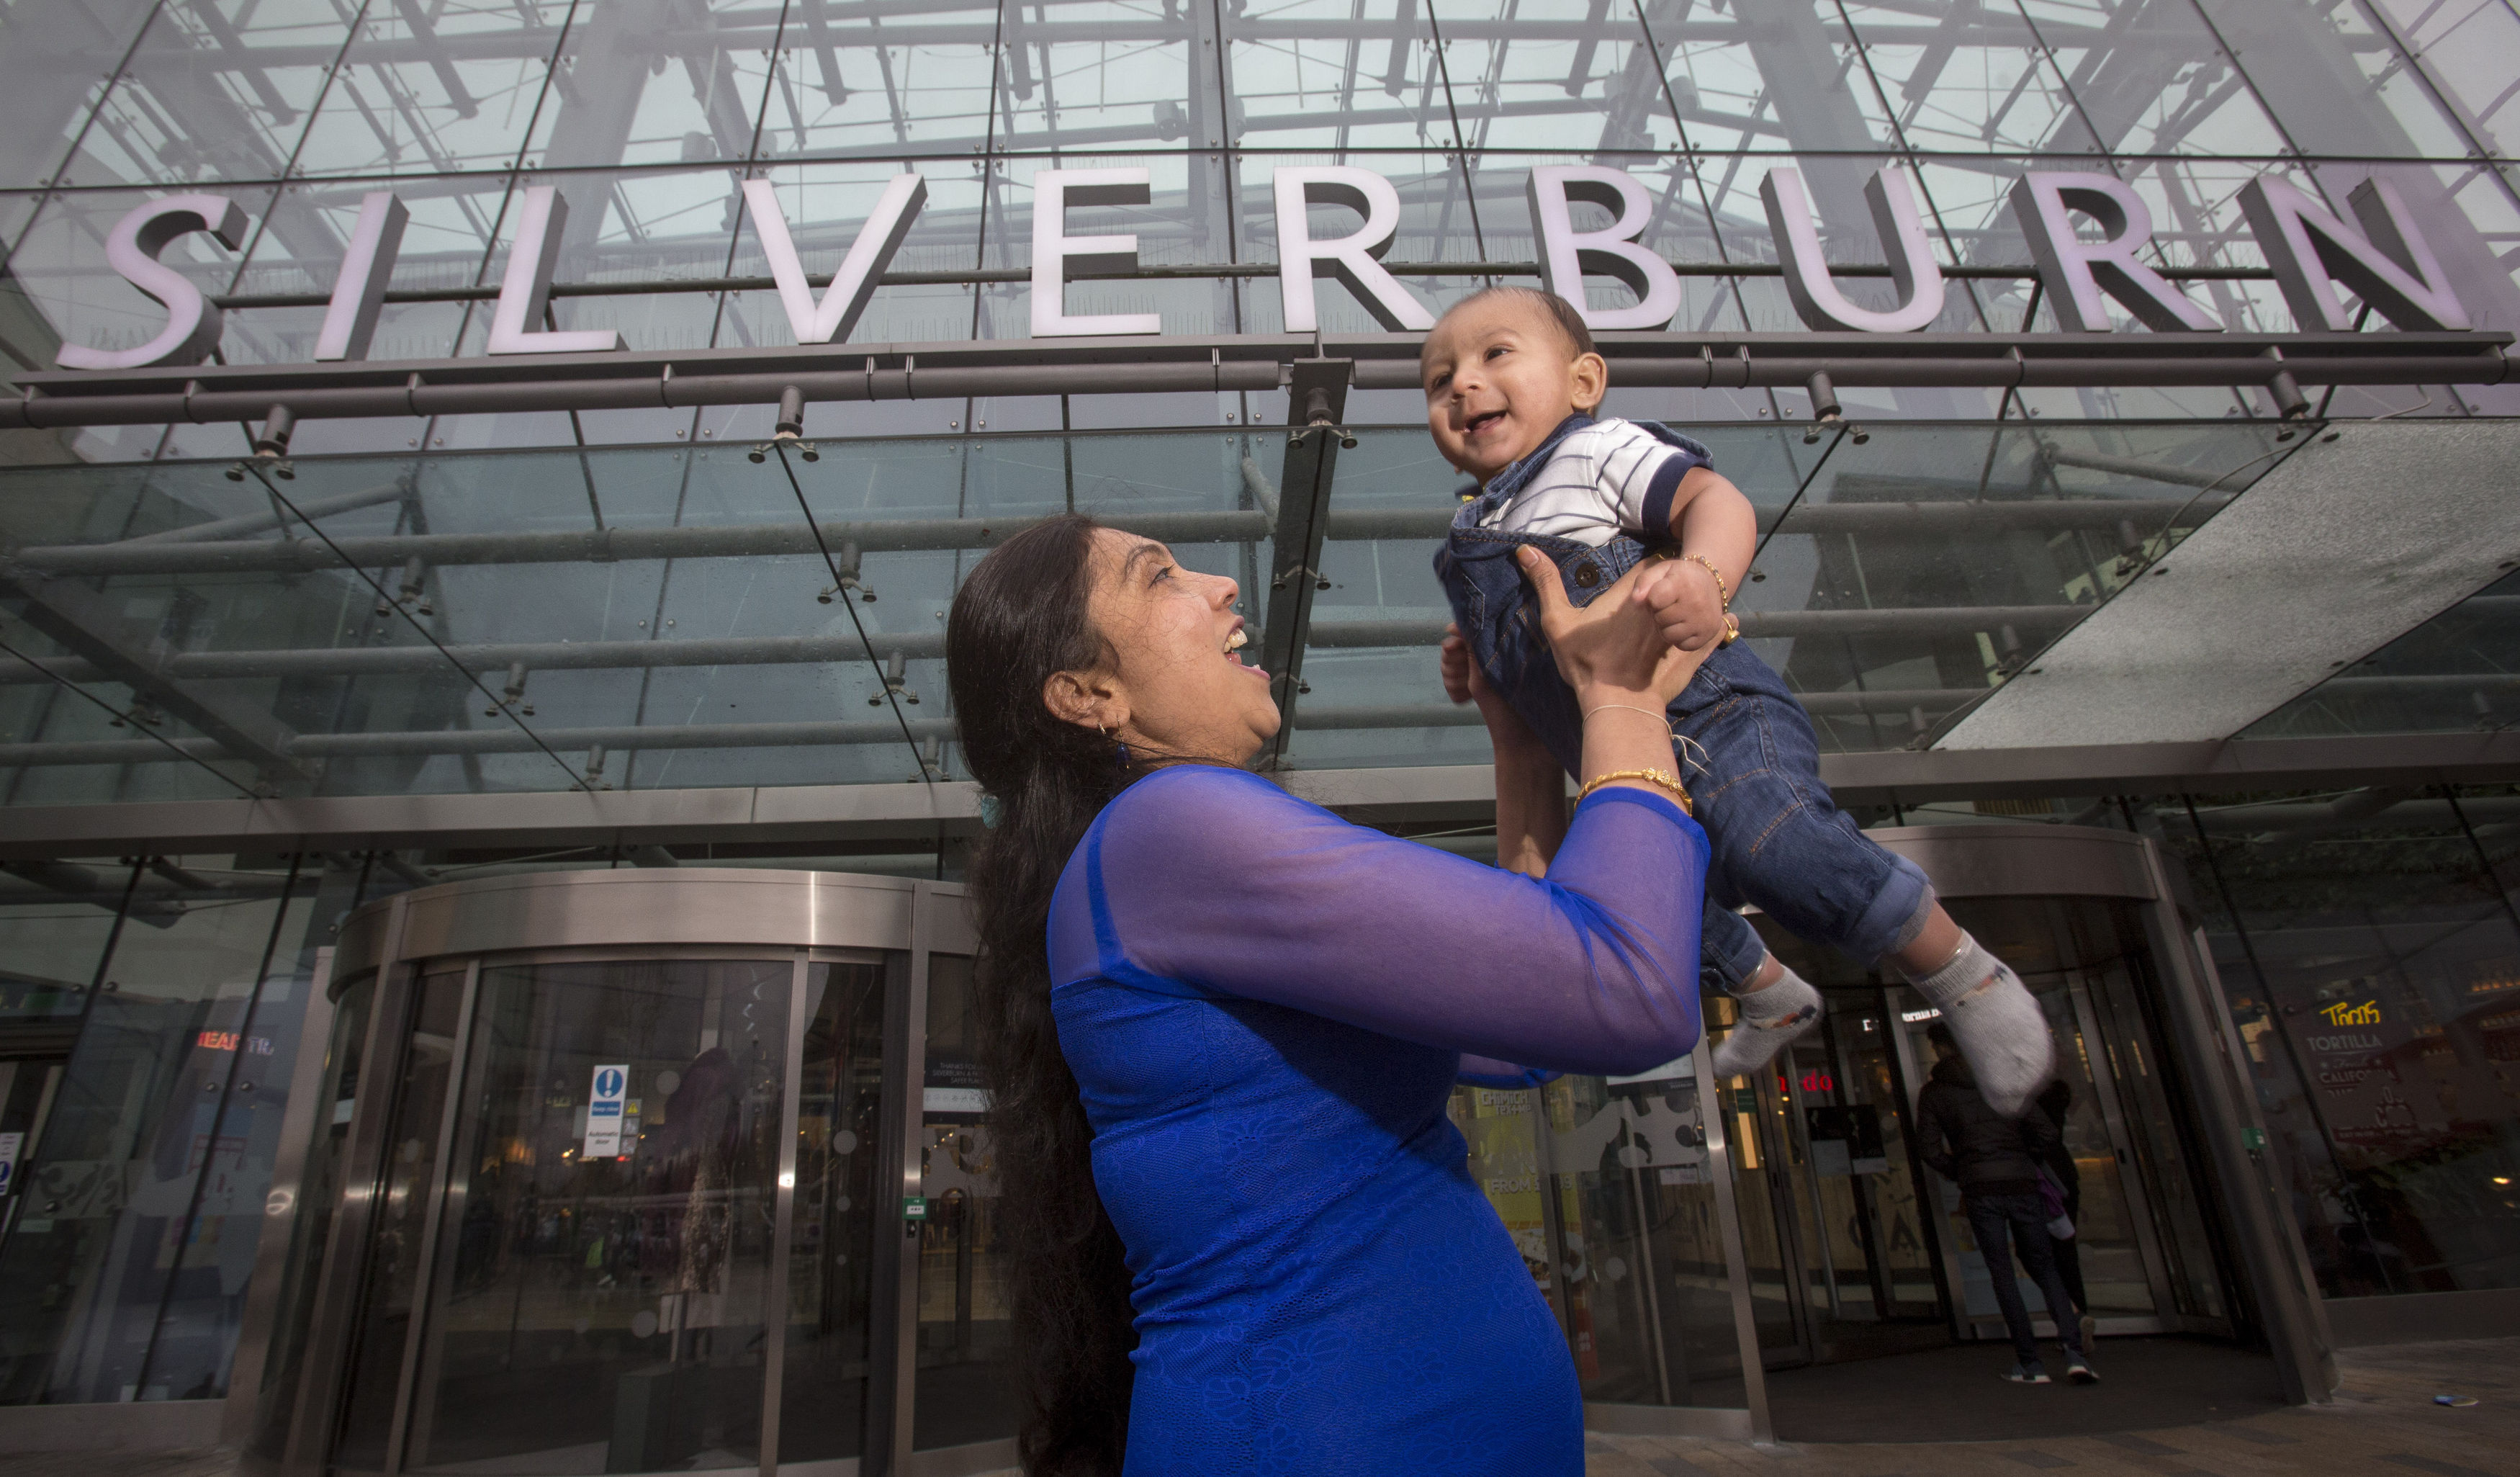 Krishna Barot with her baby Nitul outside Silverburn shopping centre in Glasgow, where he was born after Krishna went into labour unexpectedly (Mark F Gibson/PA Wire)